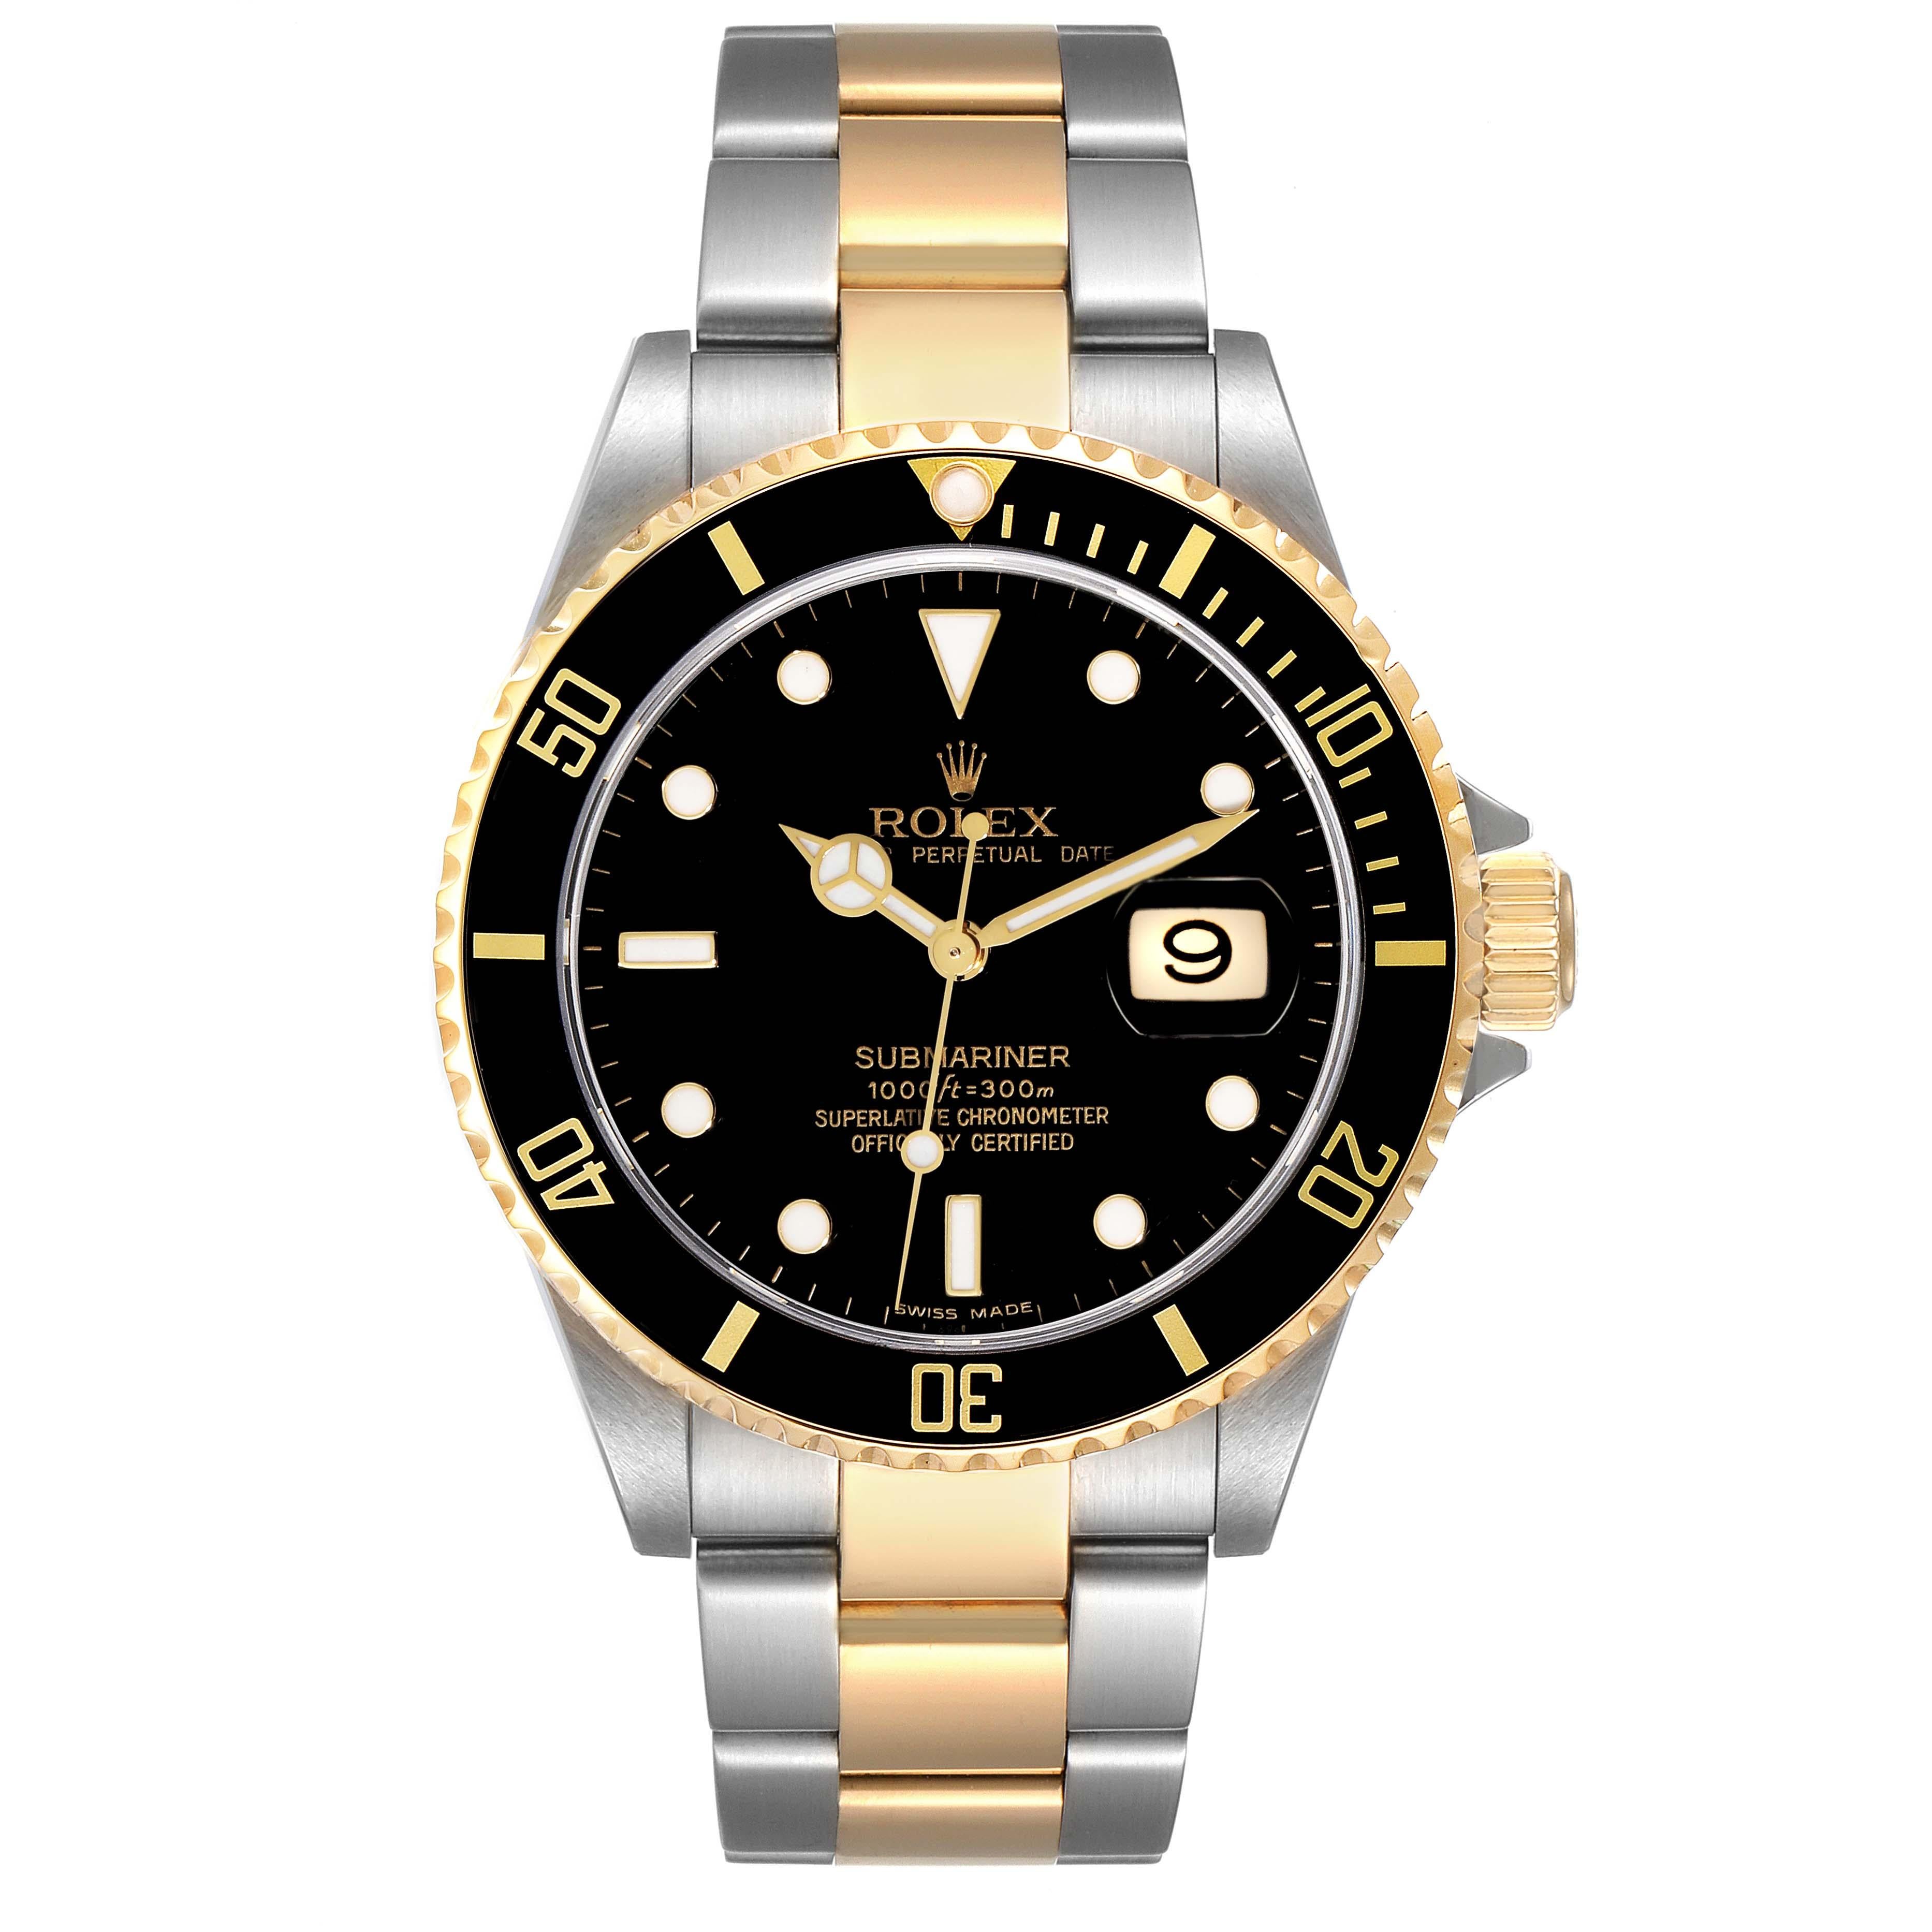 Men's Rolex Submariner Steel Yellow Gold Black Dial Mens Watch 16613 Box Papers